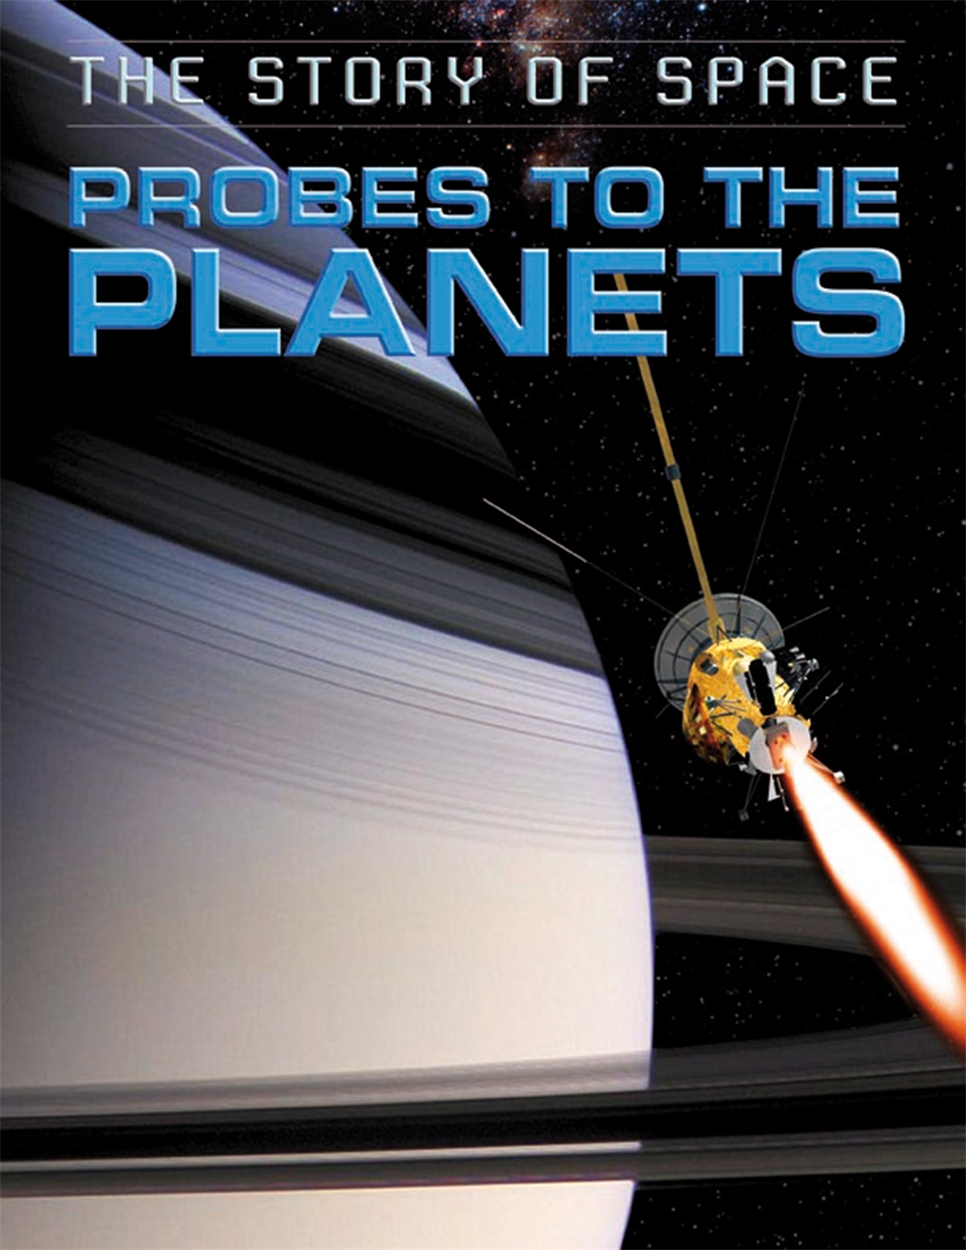 in our solar system probes